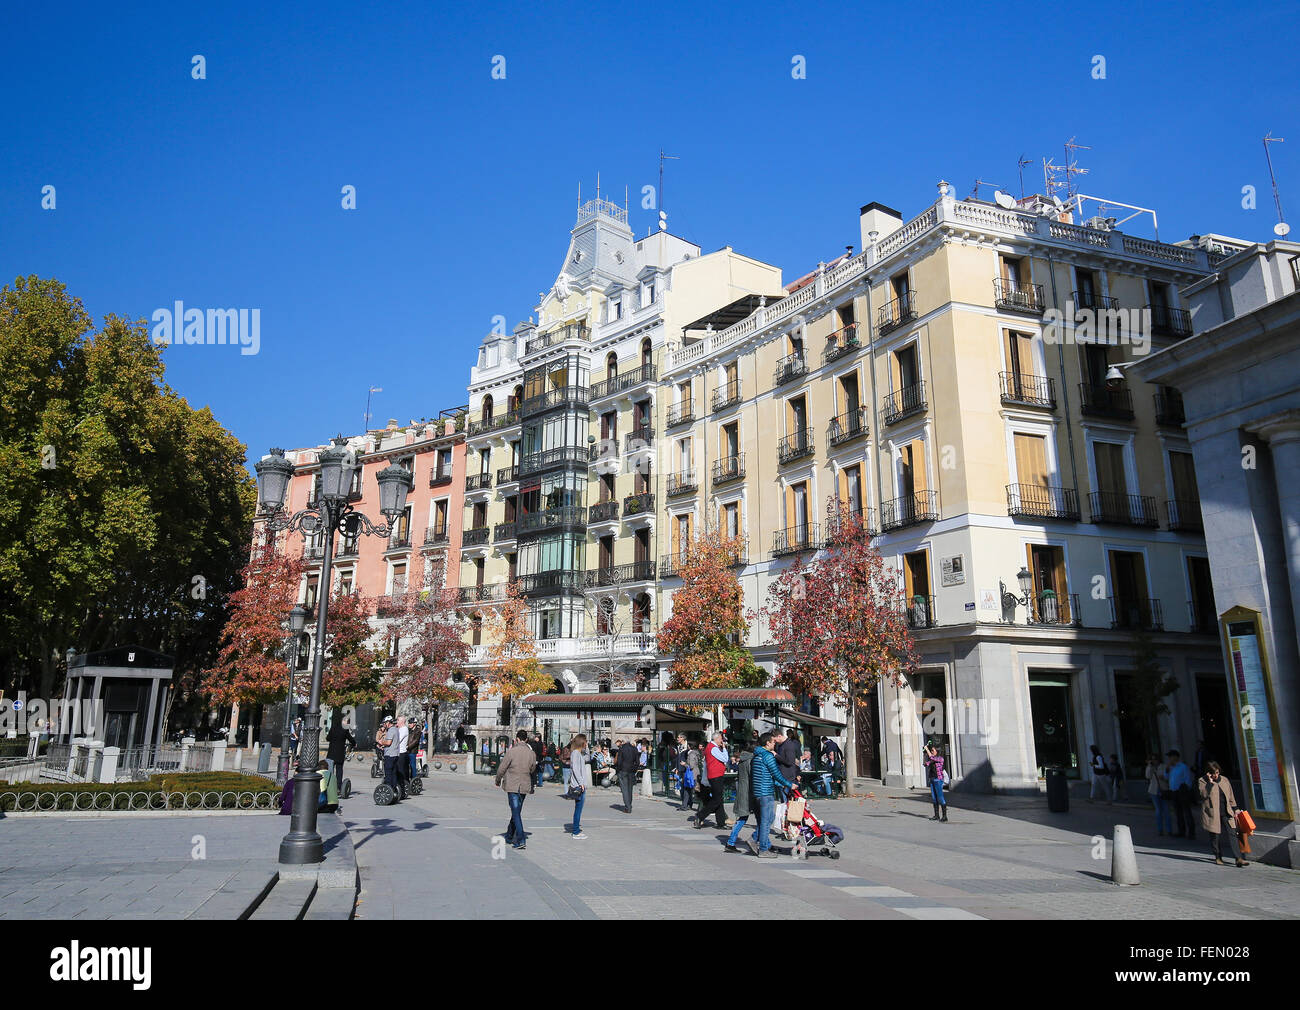 MADRID, SPAIN - NOVEMBER 14, 2015: Architecture at the Plaza de Oriente in the center of Madrid, Spain Stock Photo